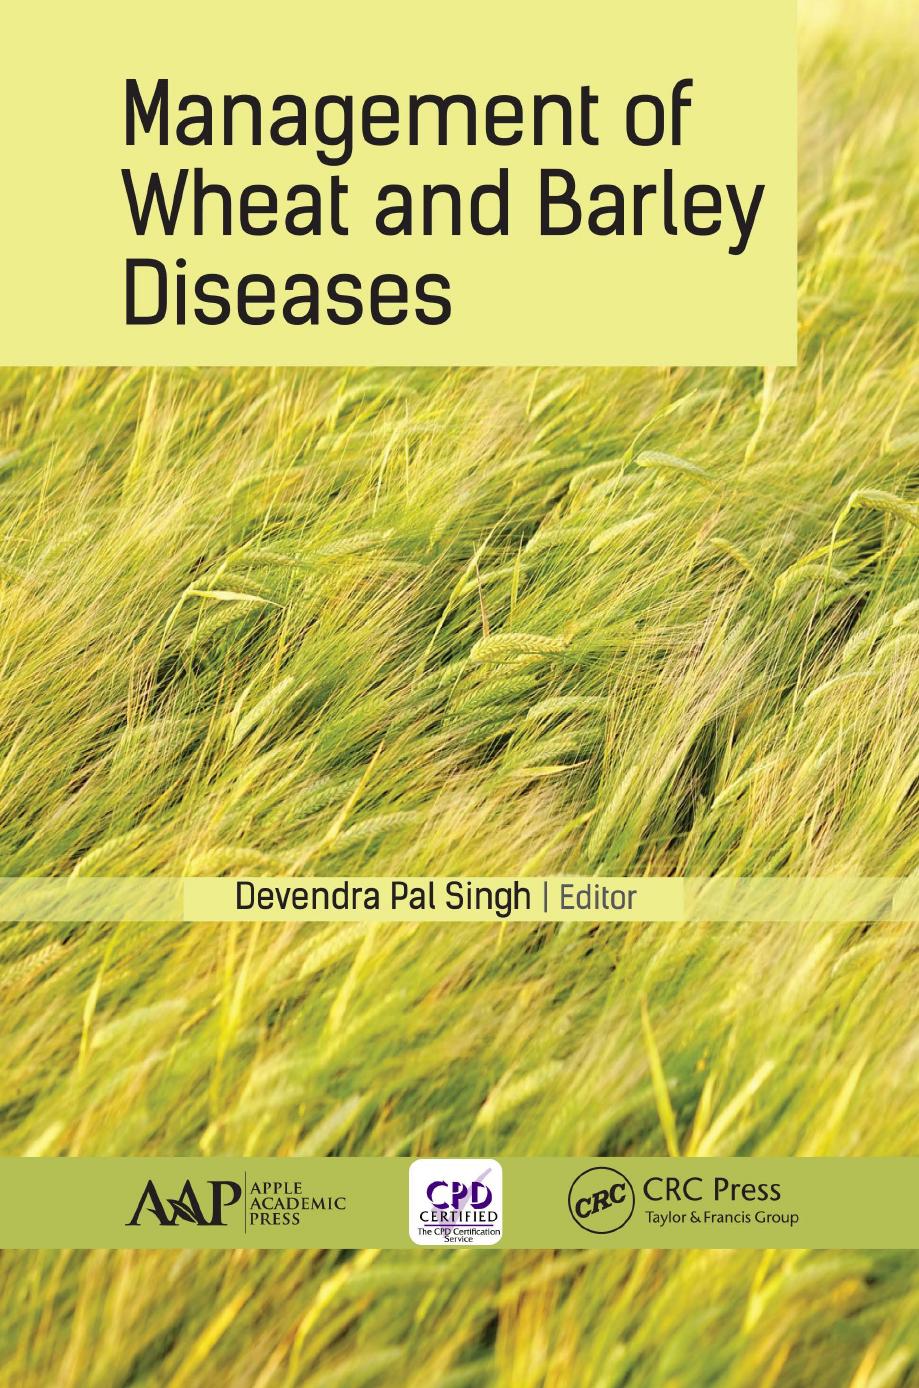 MANAGEMENT OF WHEAT AND BARLEY DISEASES